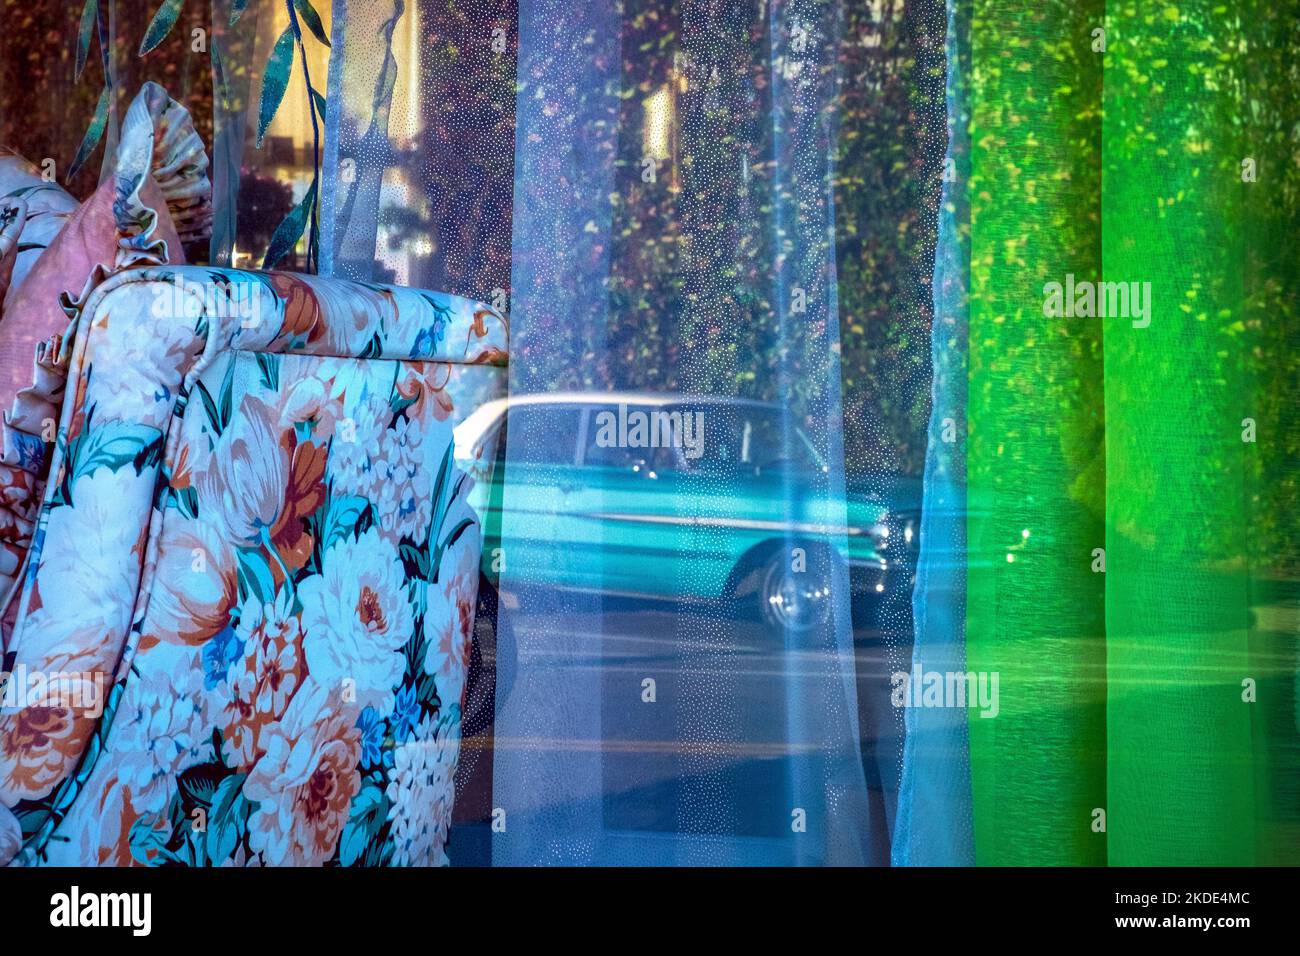 Classic turquoise car reflected in colorful fabric or curtains in a window Stock Photo